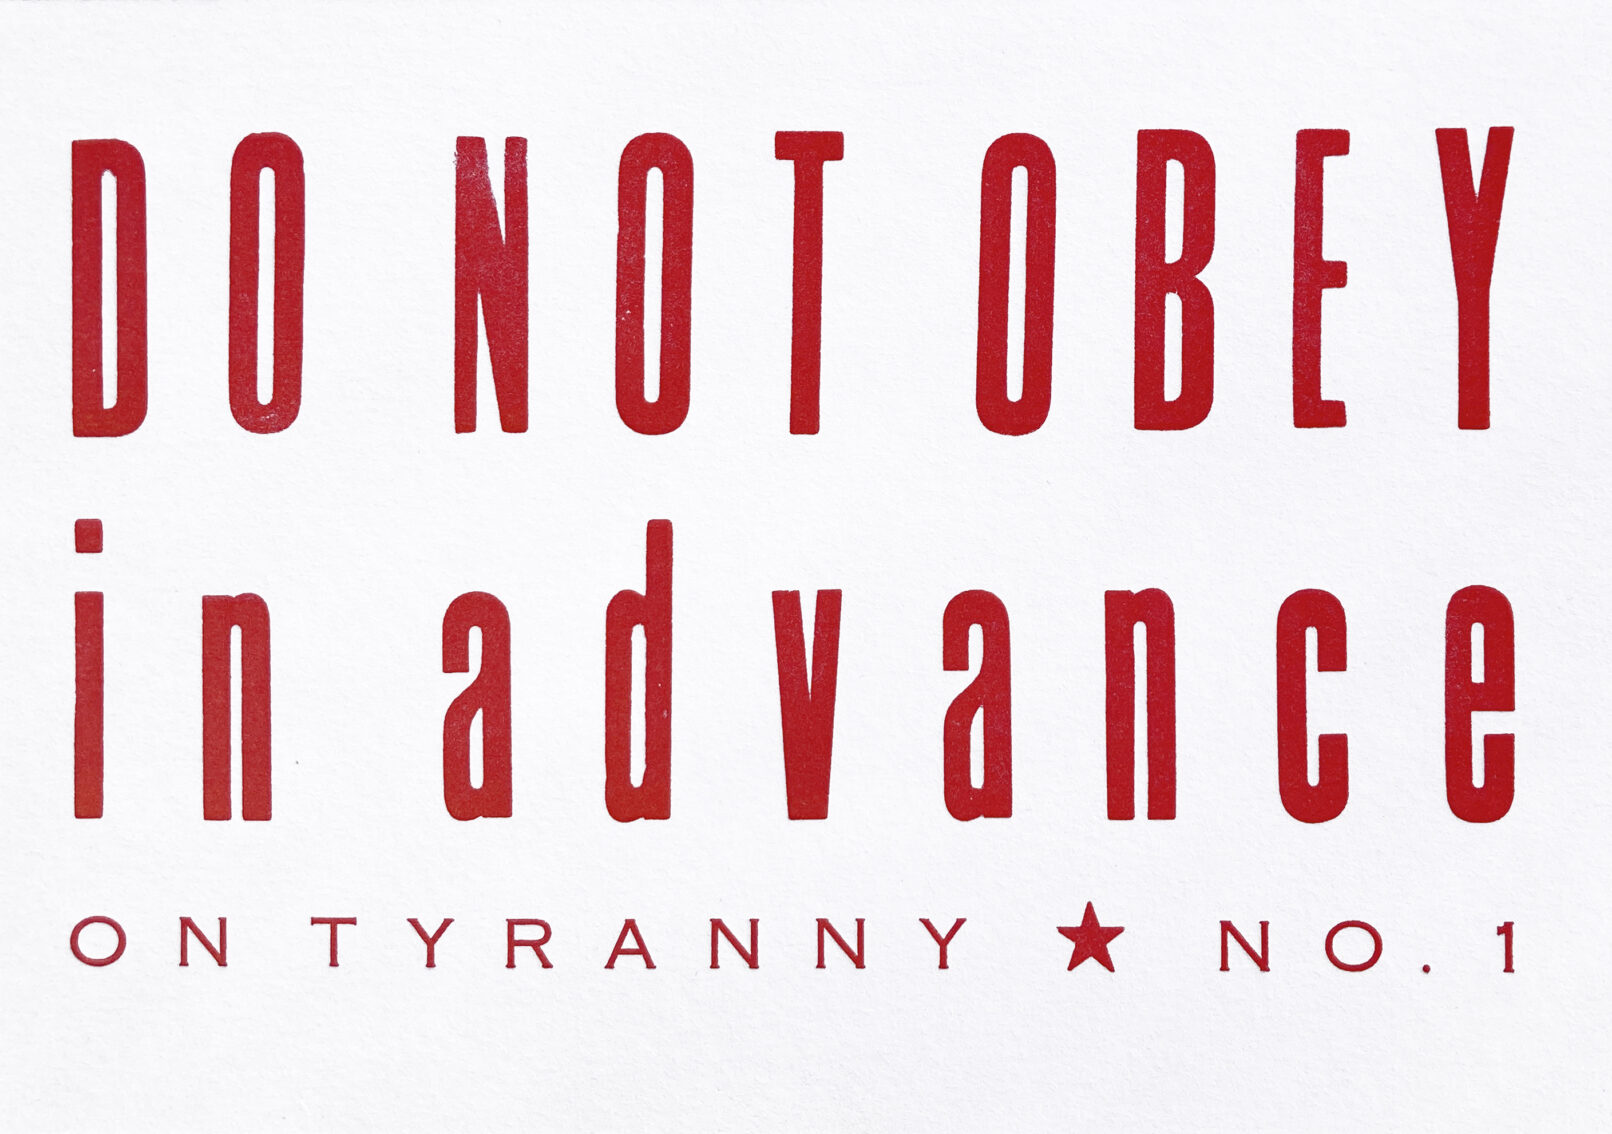 Letterpress print in red ink with text that reads "Do Not Obey in Advance On Tyranny No. 1."